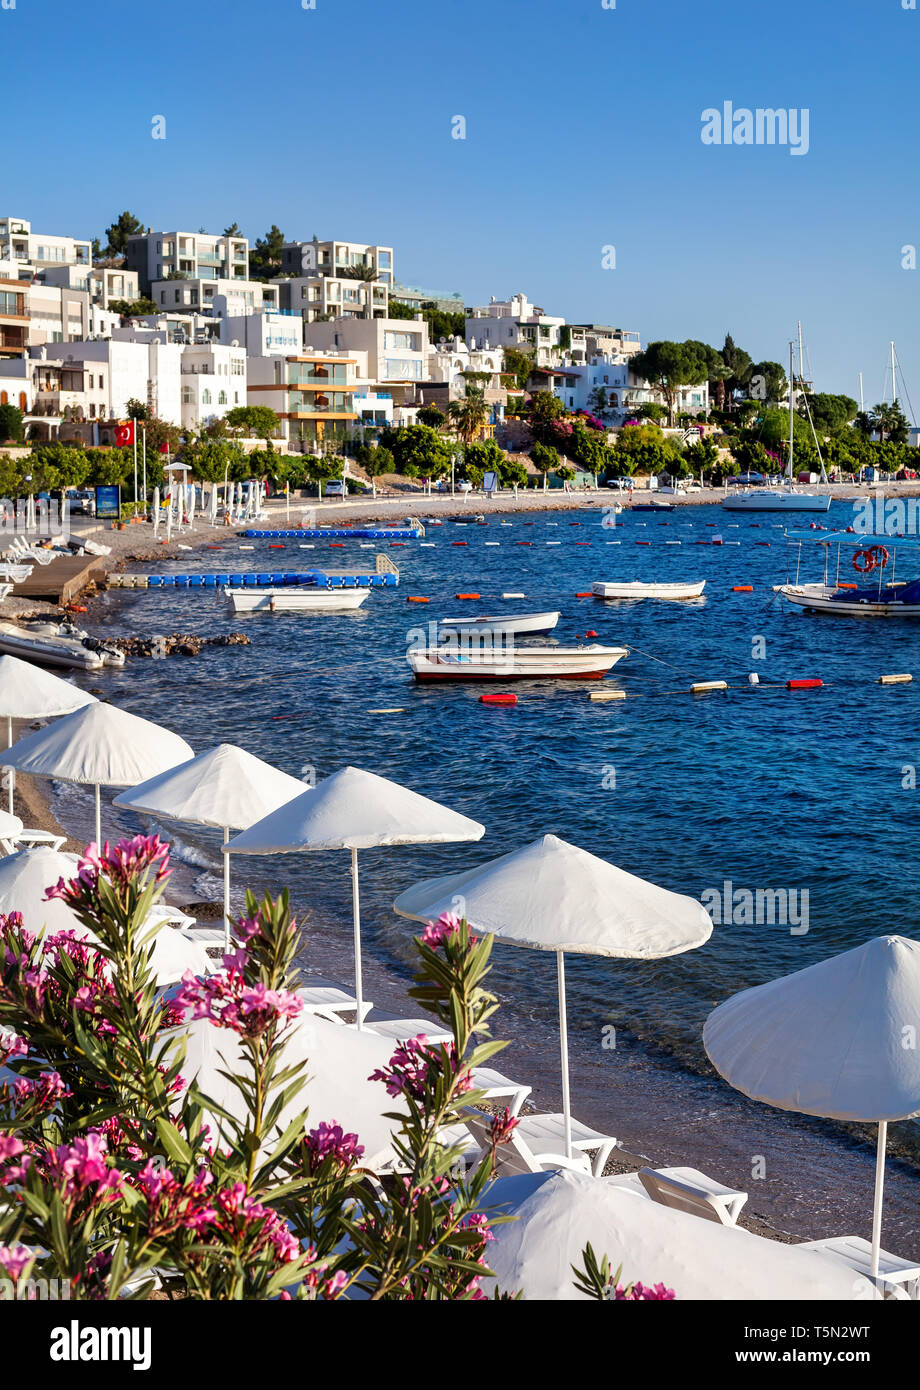 White Umbrellas and sunbeds near lagoon with boats on the beach in Bodrum, Turkey Stock Photo